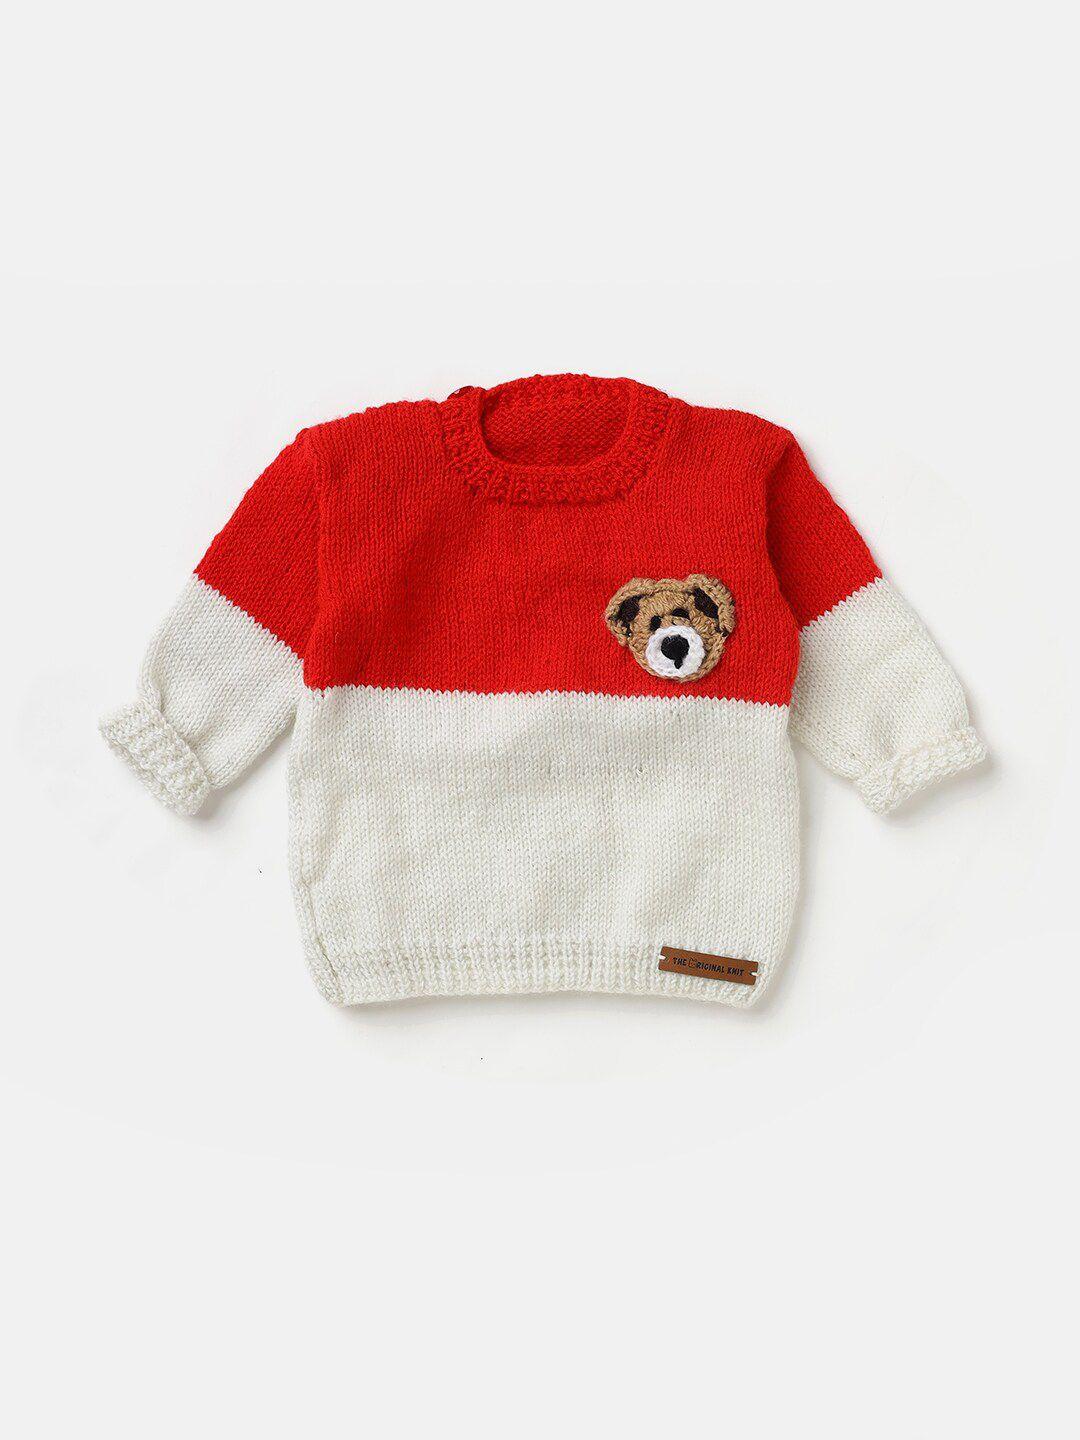 the original knit unisex kids red & white colourblocked pullover